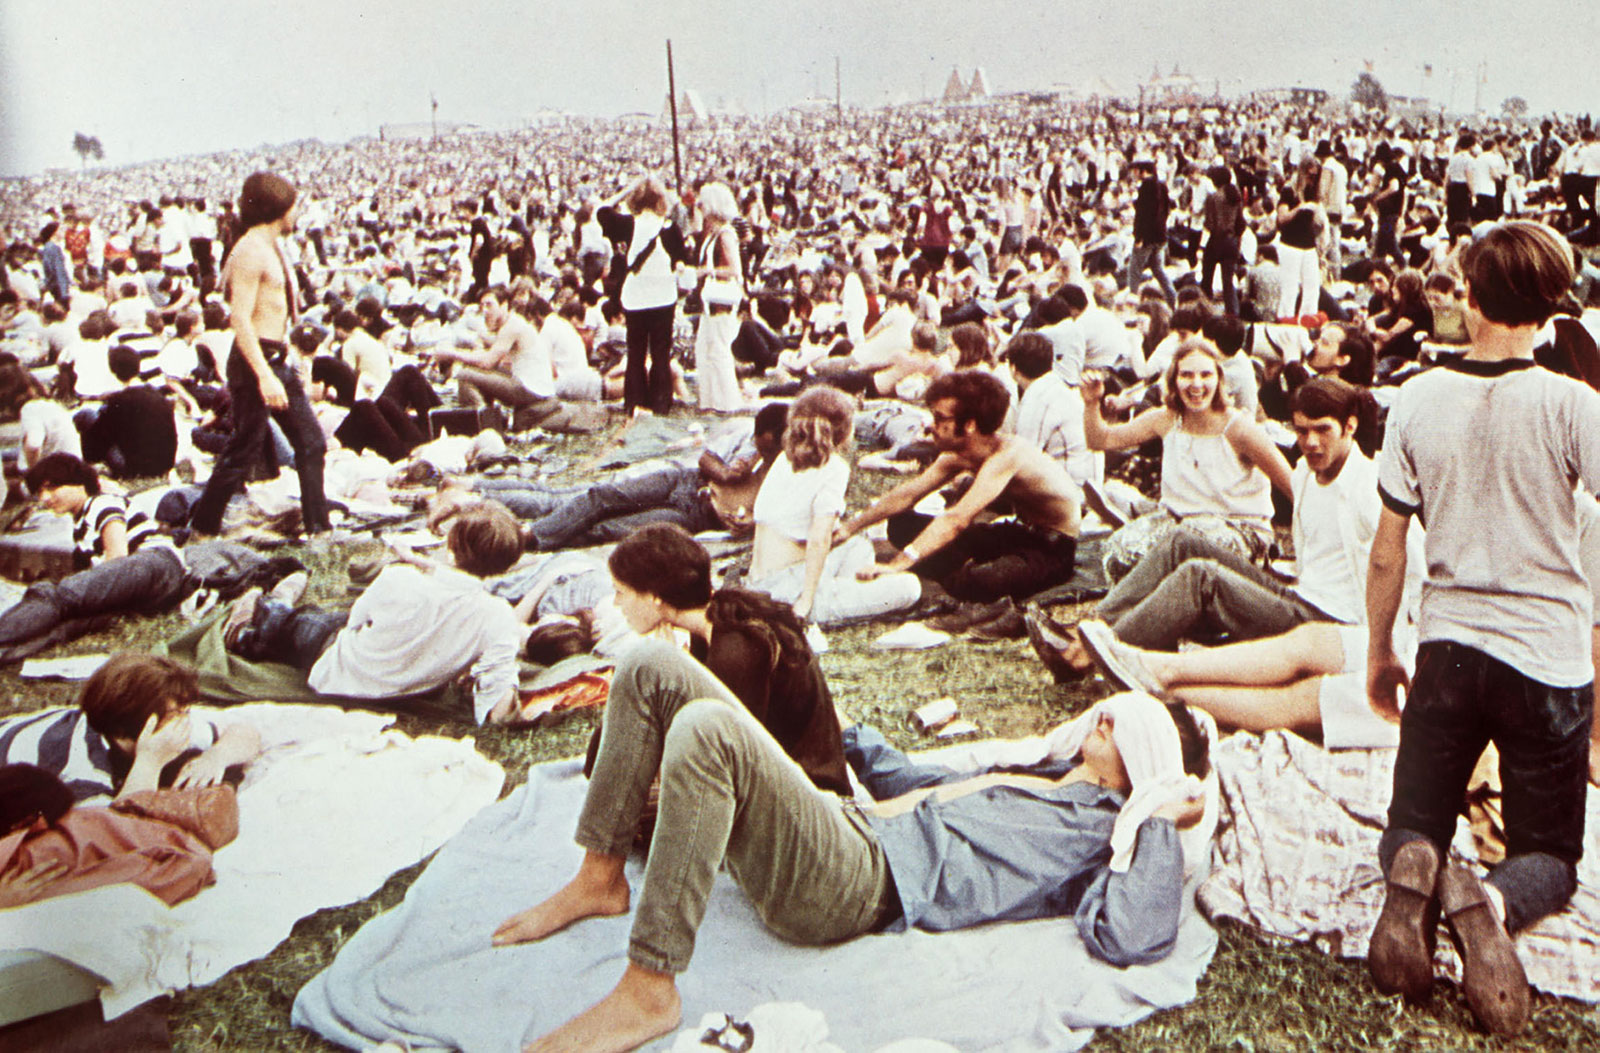 Can You Make It to End of This Increasingly Difficult History Quiz? Film Still Documentary Woodstock Music Art Fair August 1969 Bethel New York